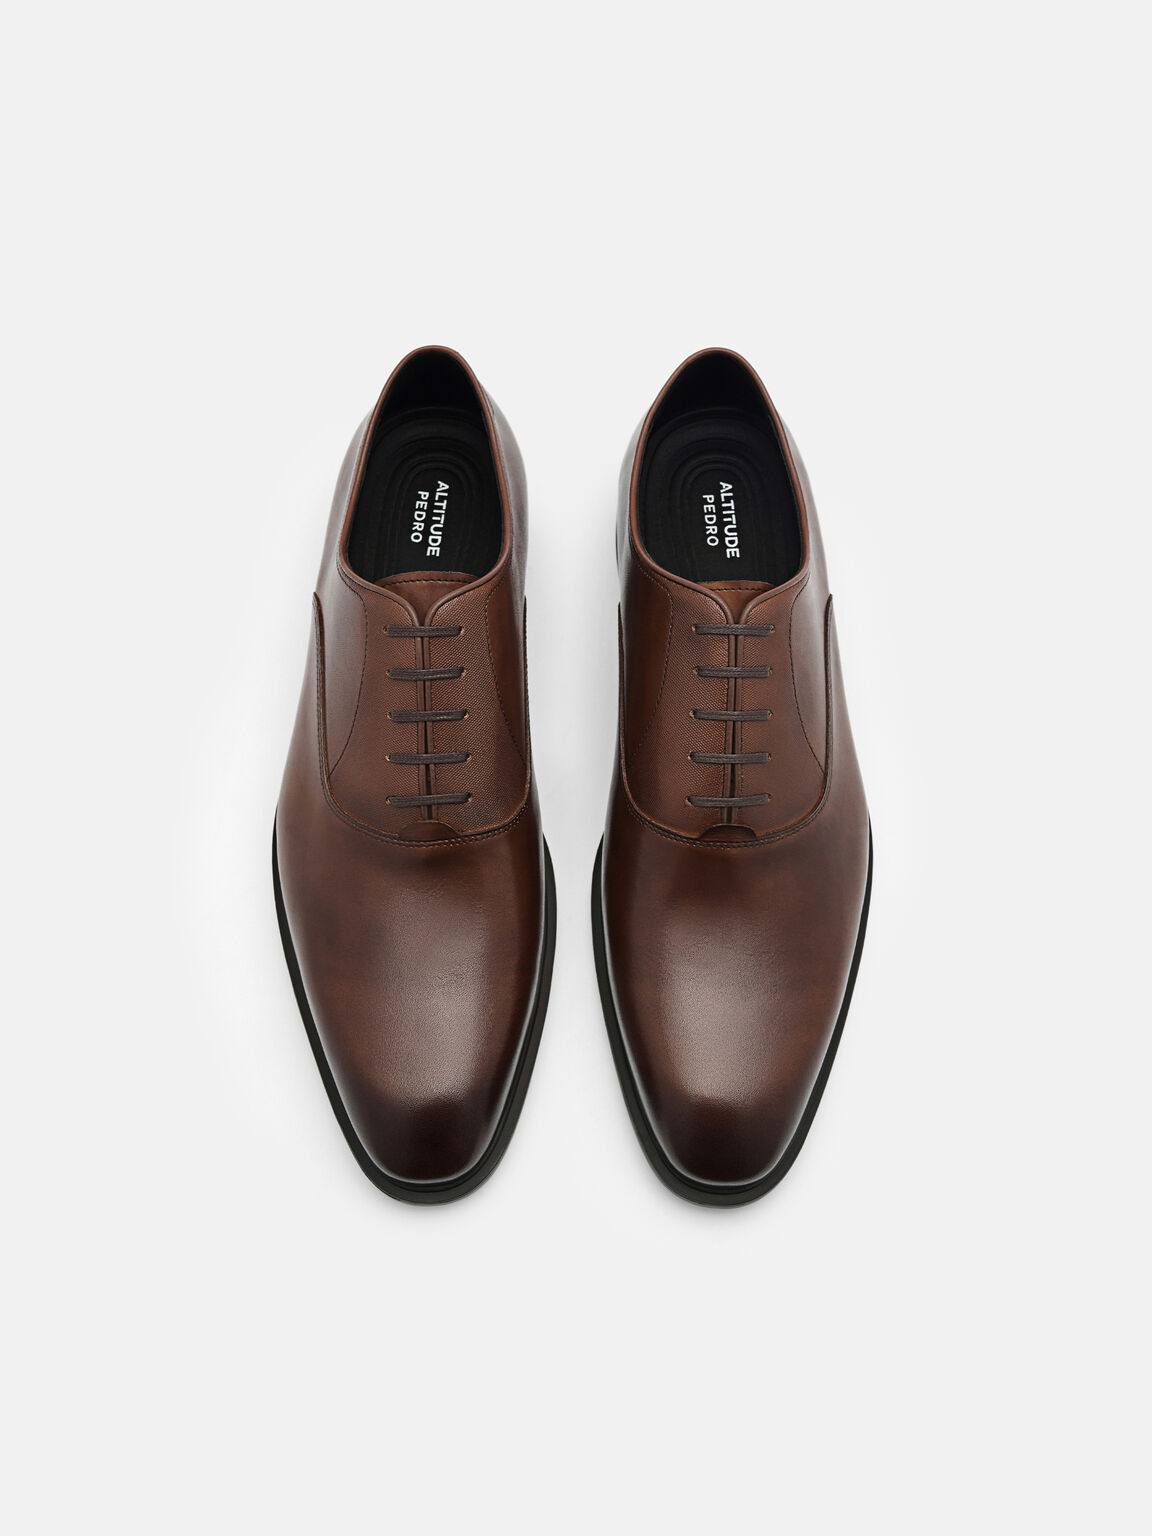 Leather Oxford Shoes, Brown, hi-res